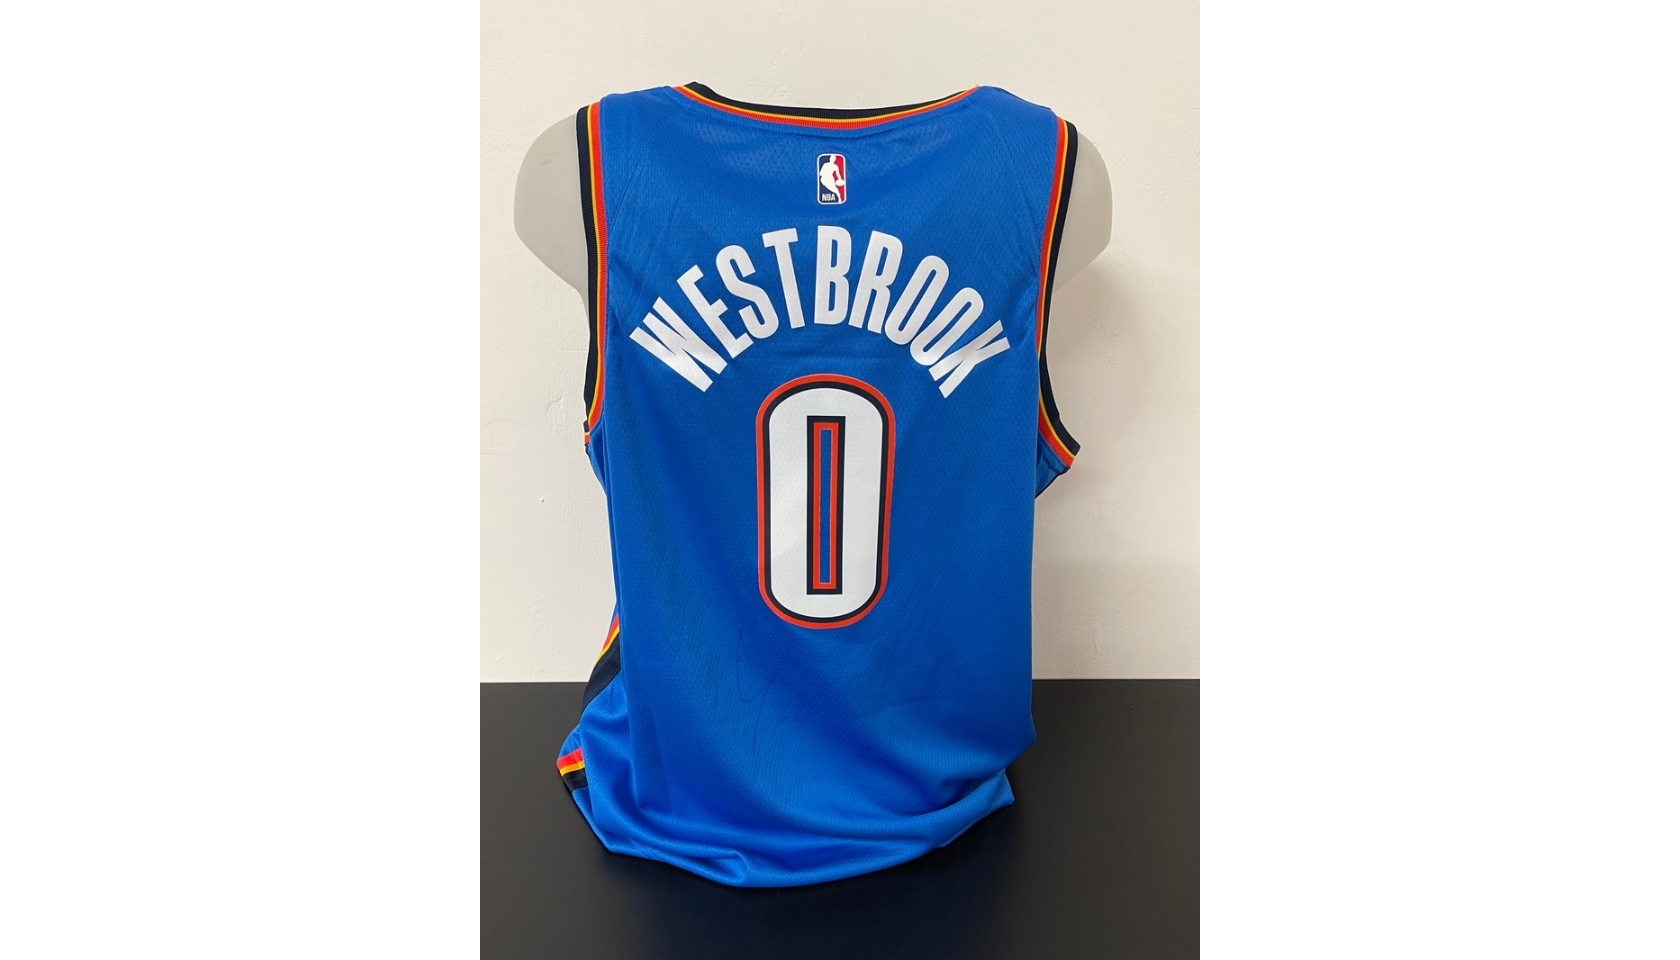 Russell Westbrook #0 OKC Thunder Autographed Jersey Framed PSA